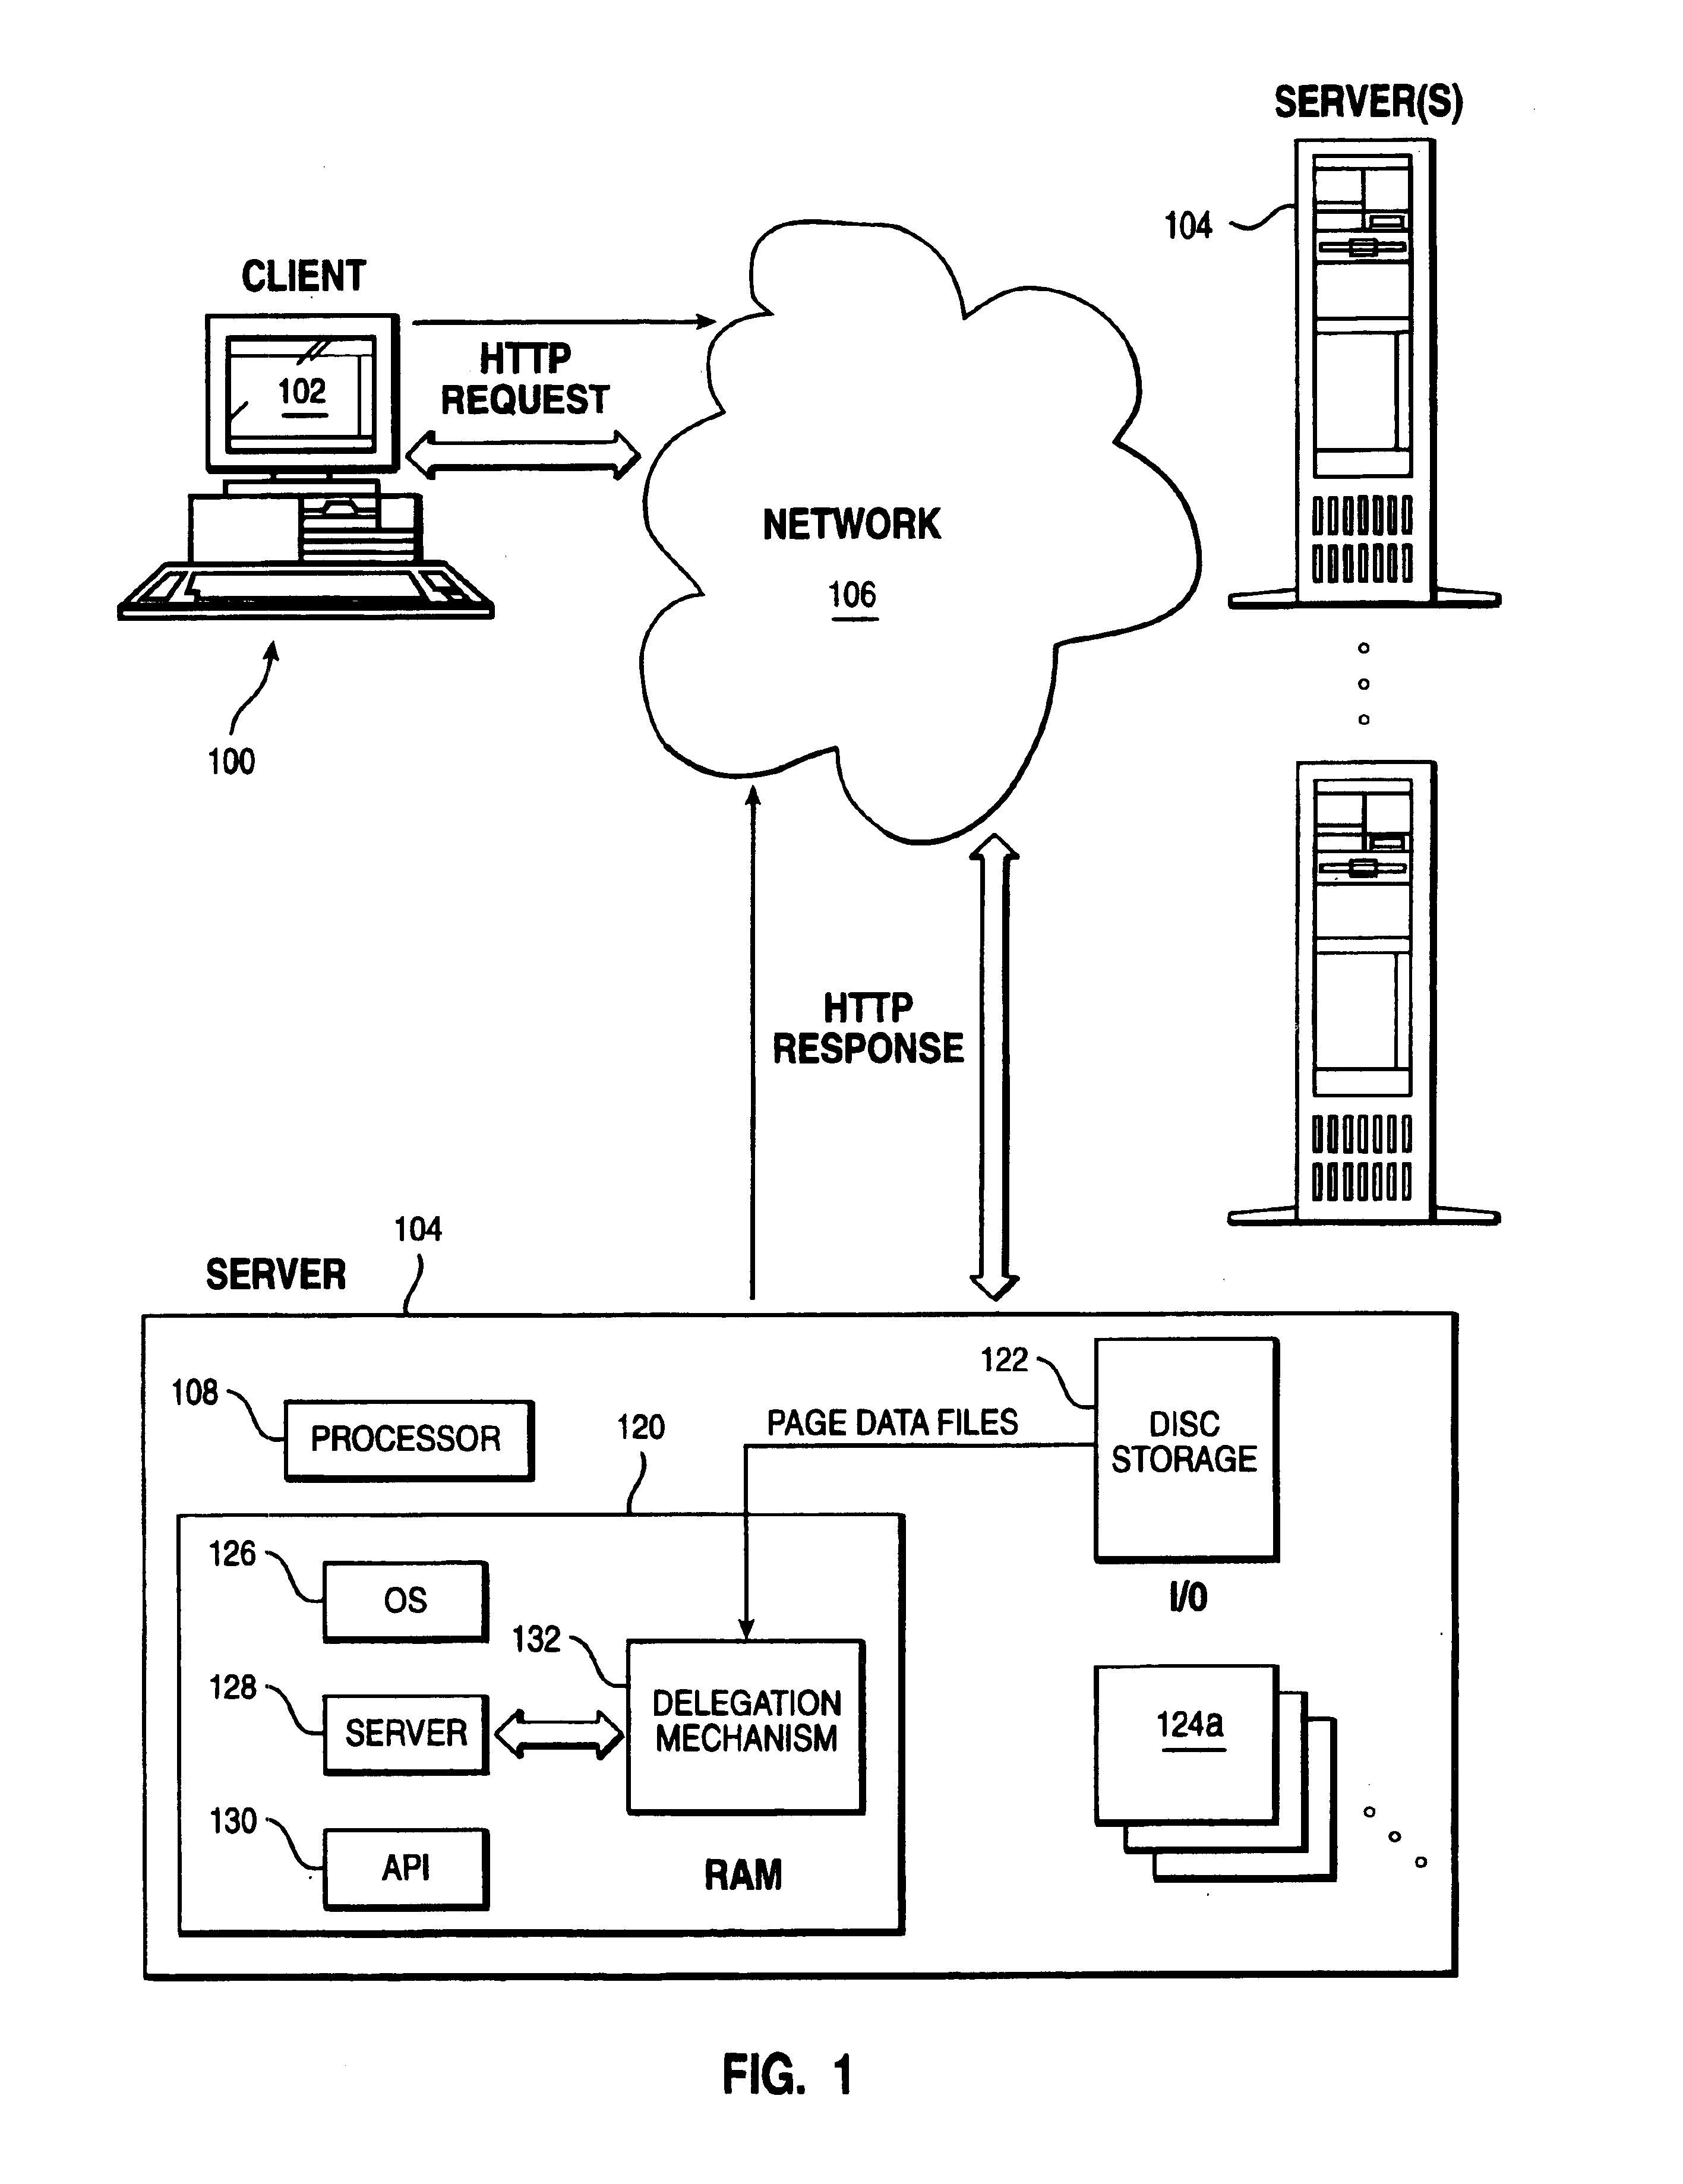 Method of enabling an intermediary server to impersonate a client user's identity to a plurality of authentication domains